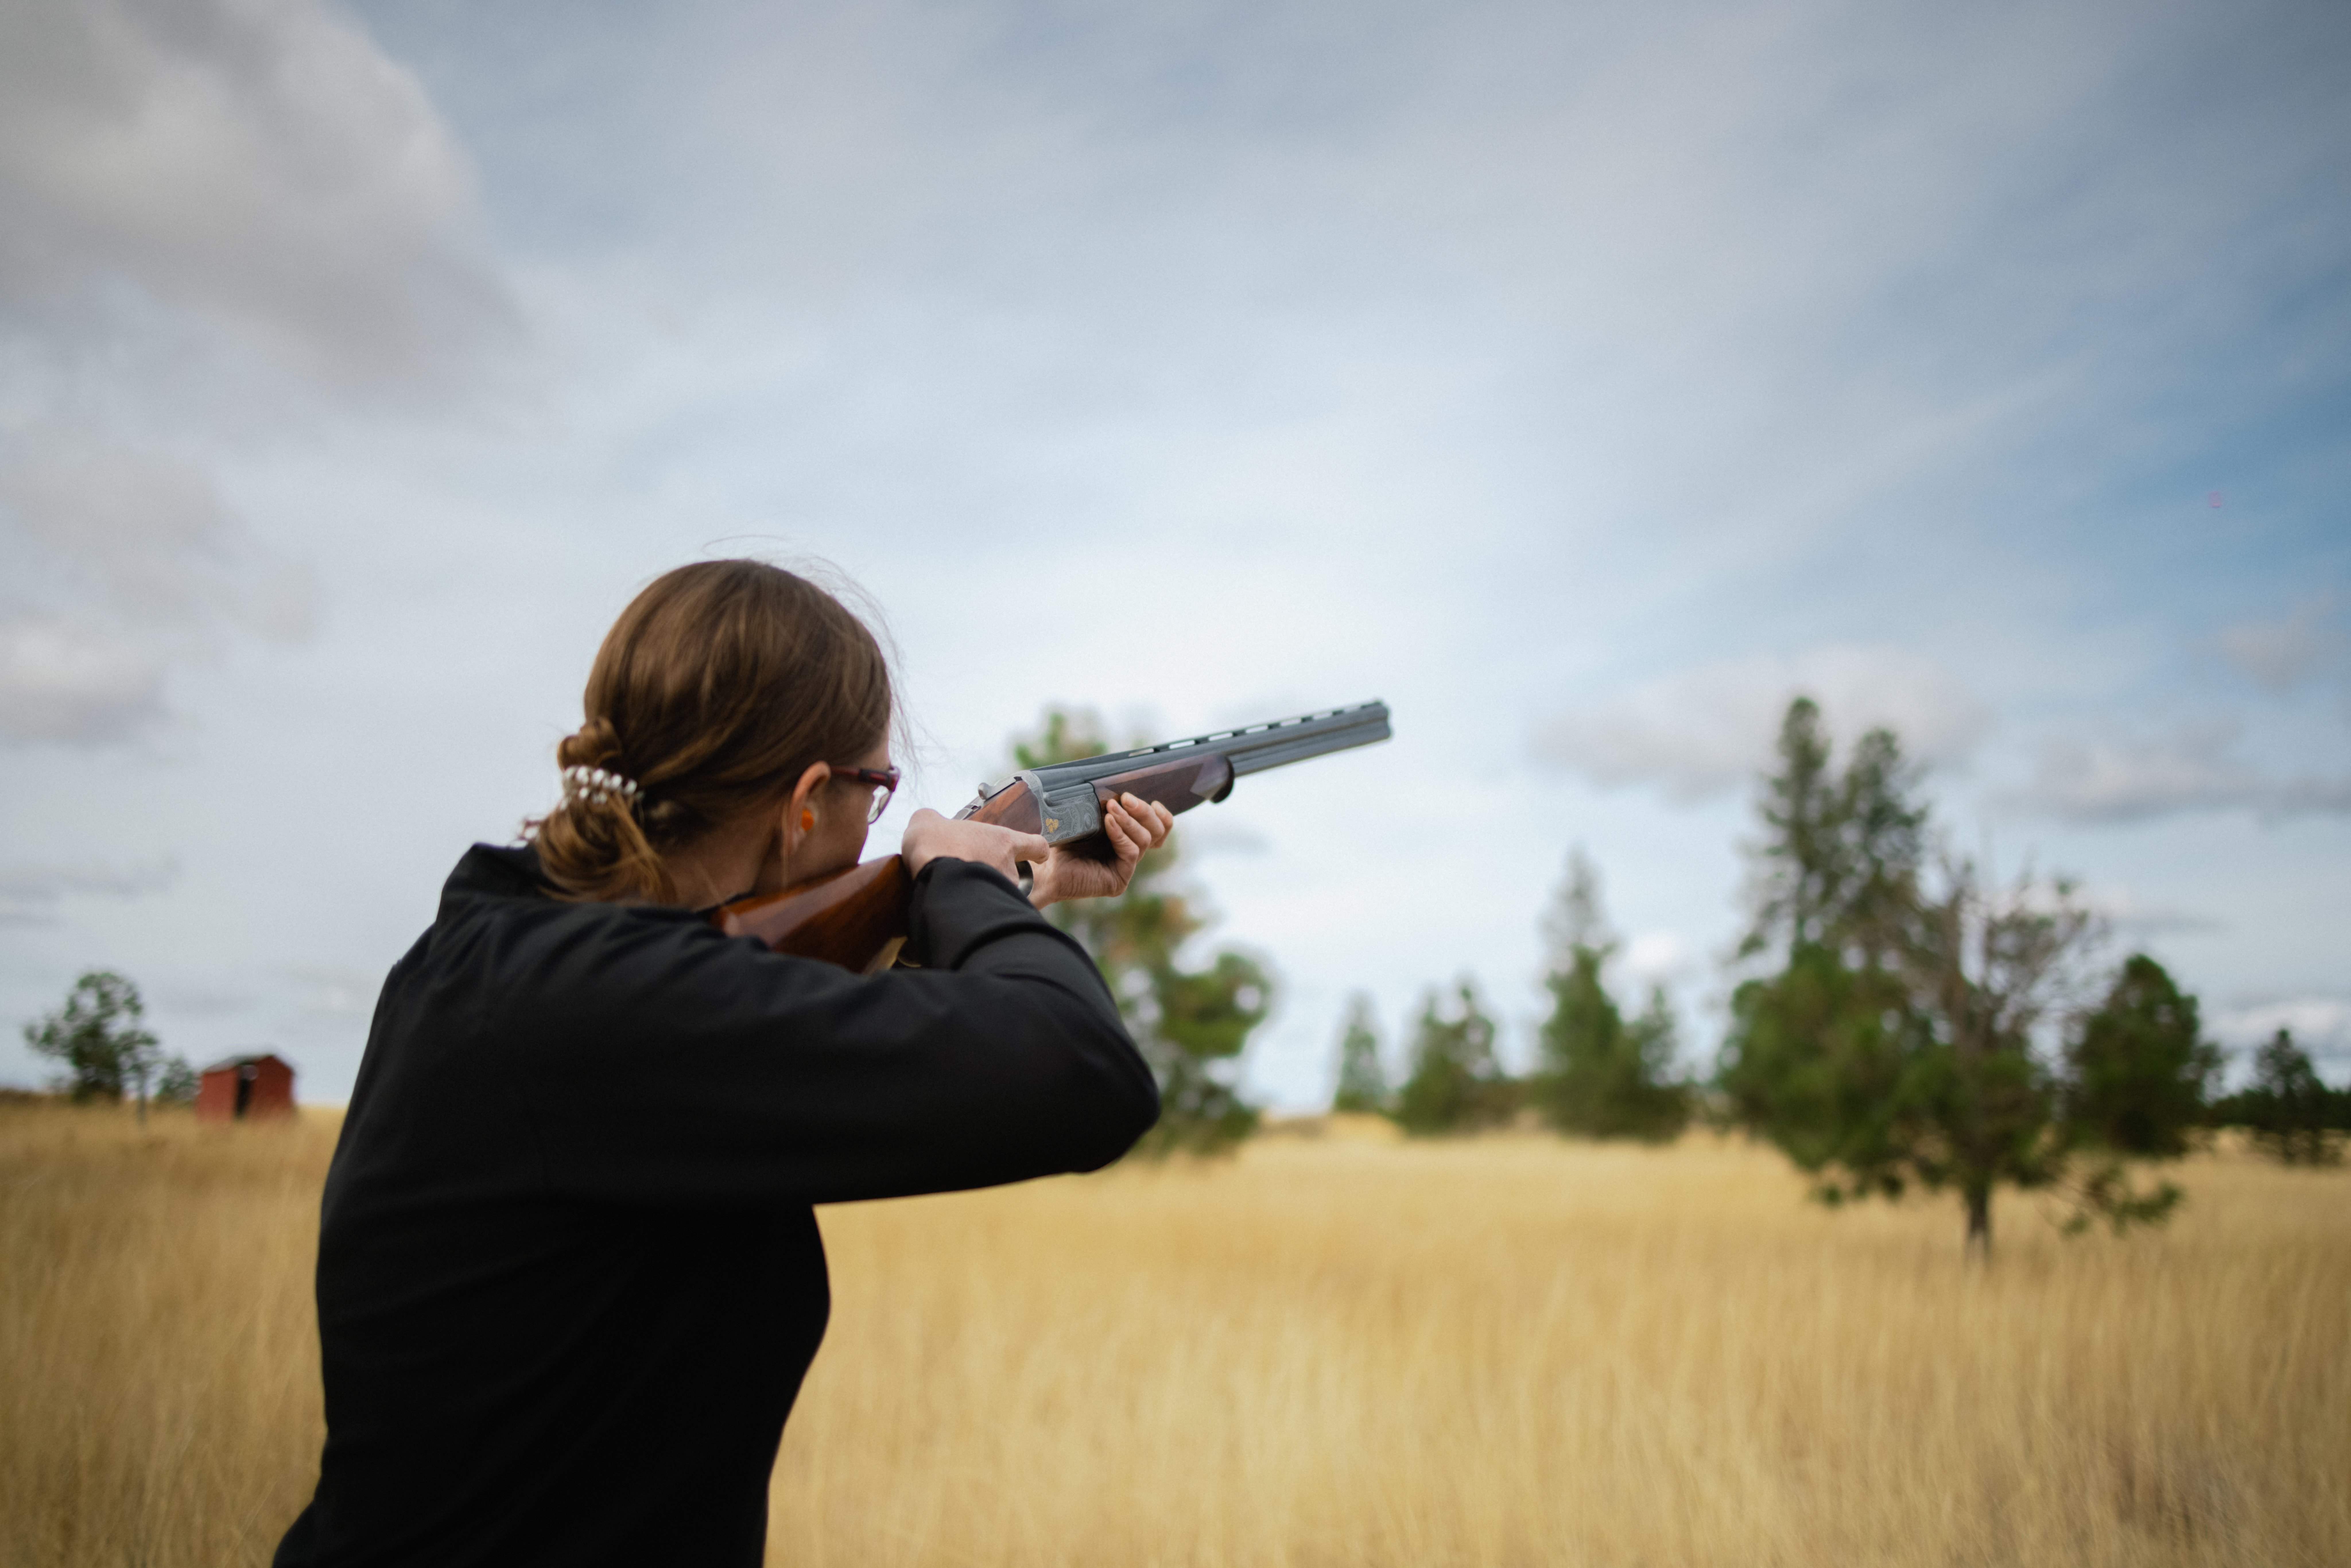 Female shooters need a different fit in their shotguns.